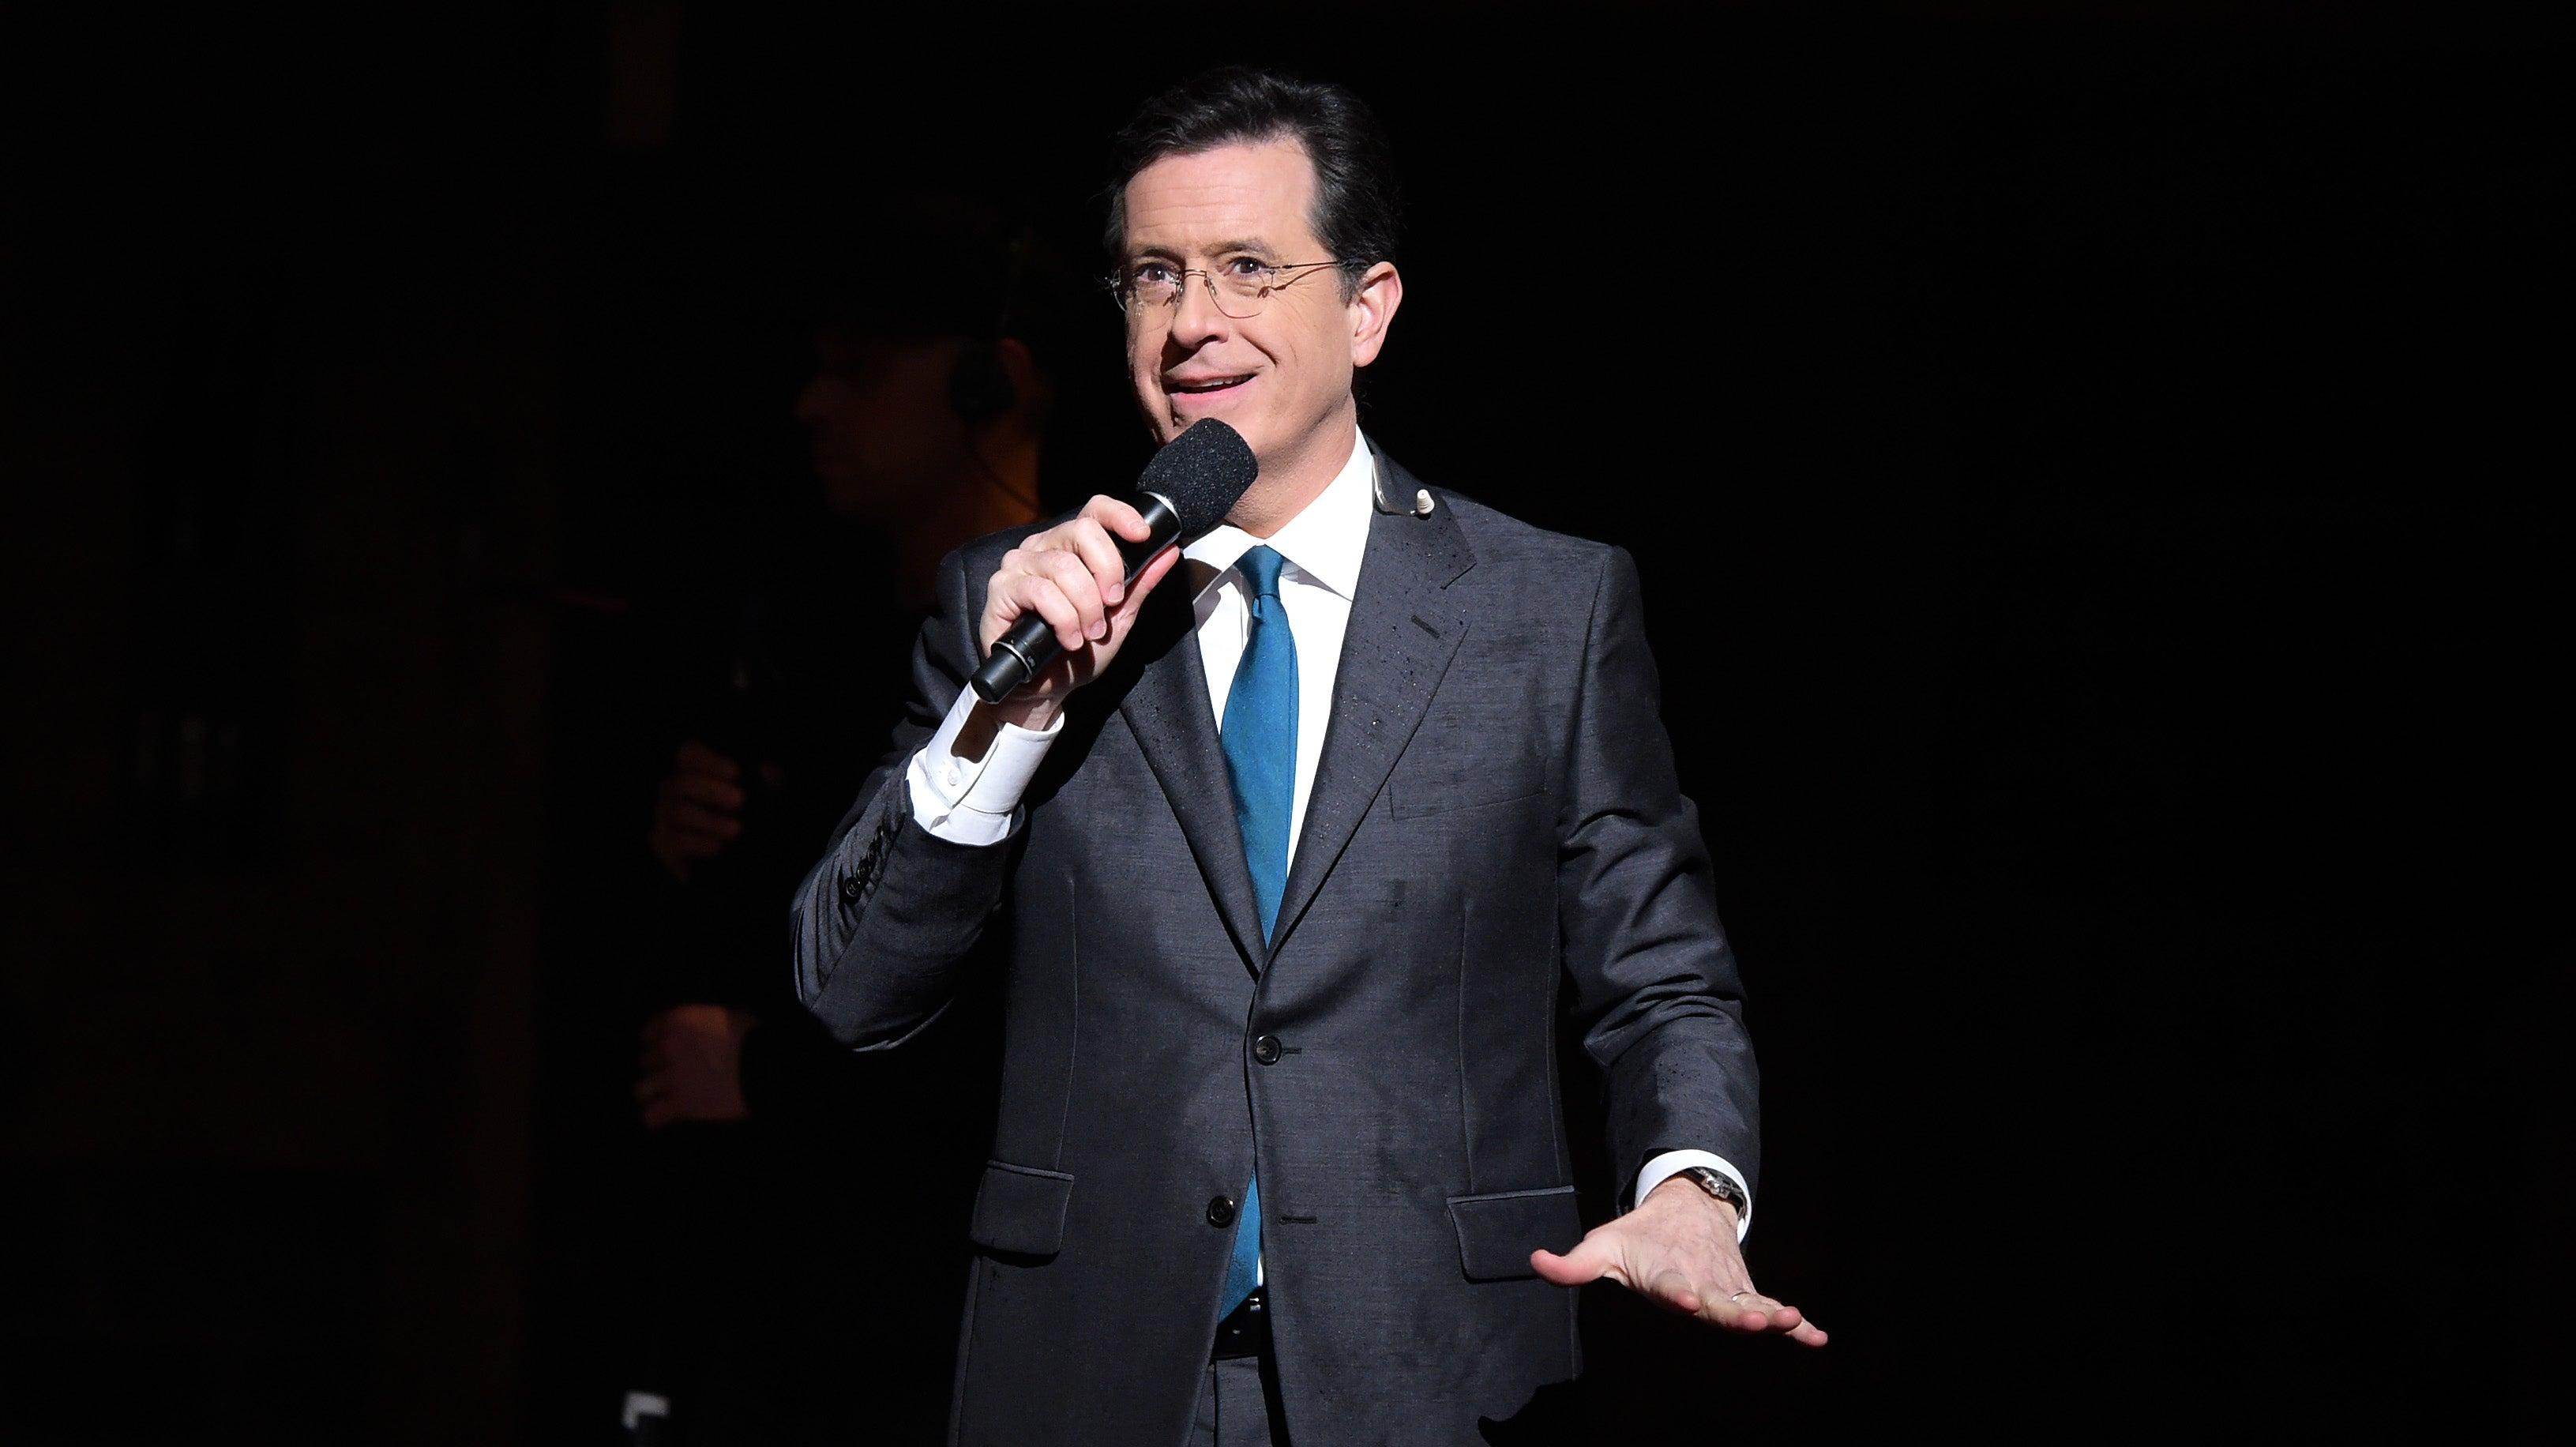 Stephen Colbert cannot wait to smell viewers again, The Late Show announces live audience return